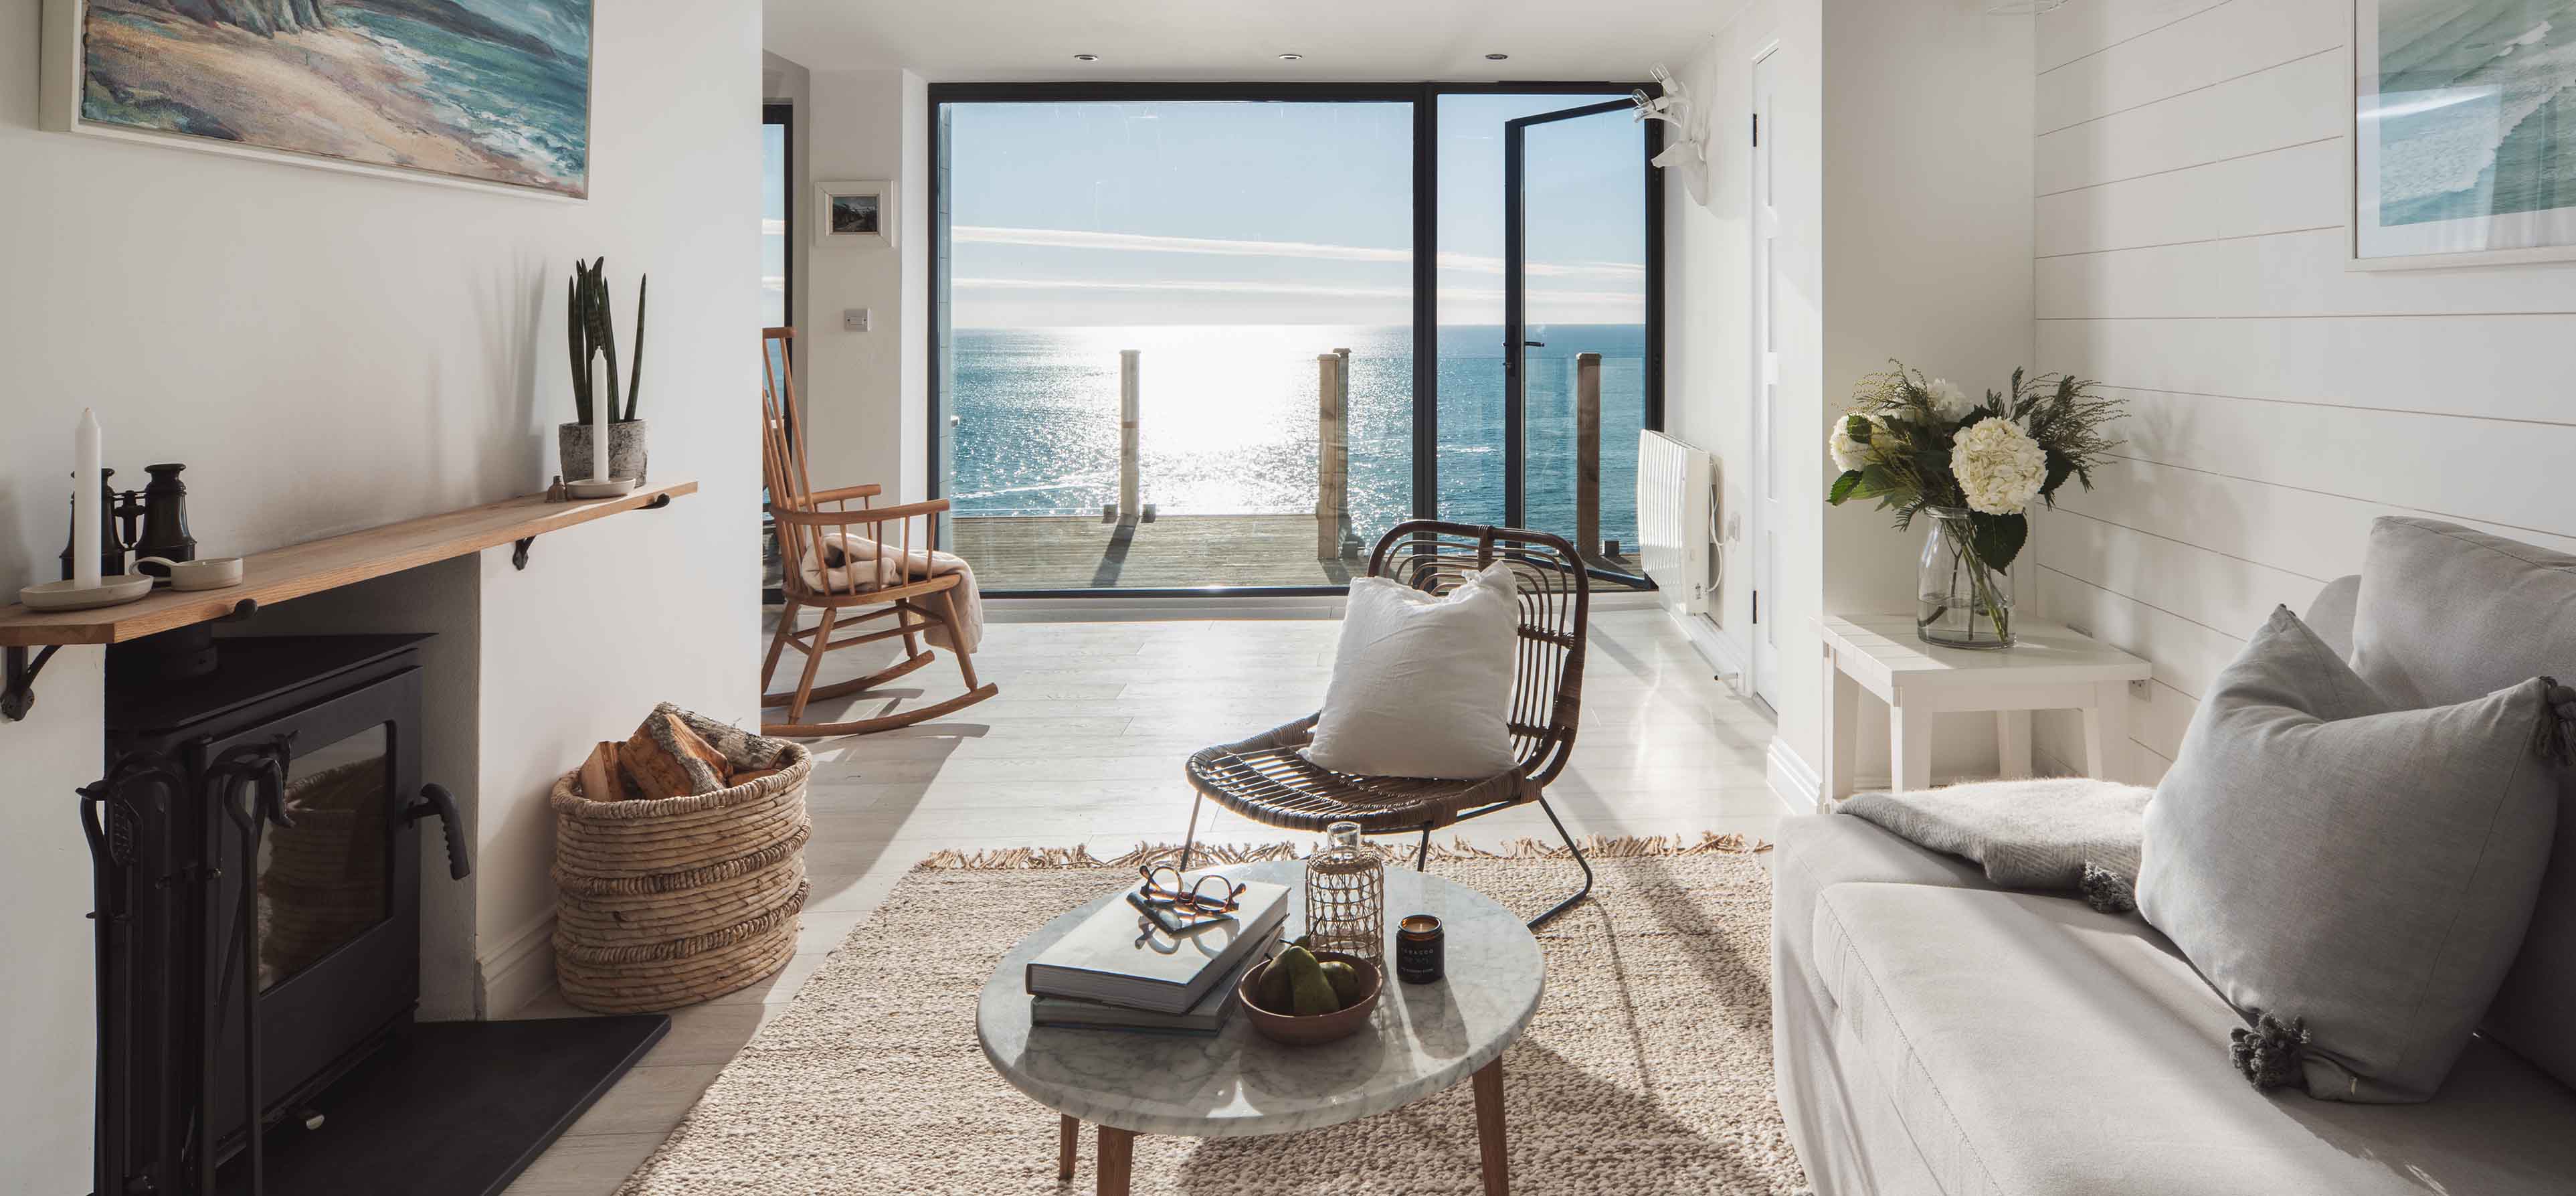 Luxury escapism meets curated calm at our romantic clifftop retreat for two... @Ula